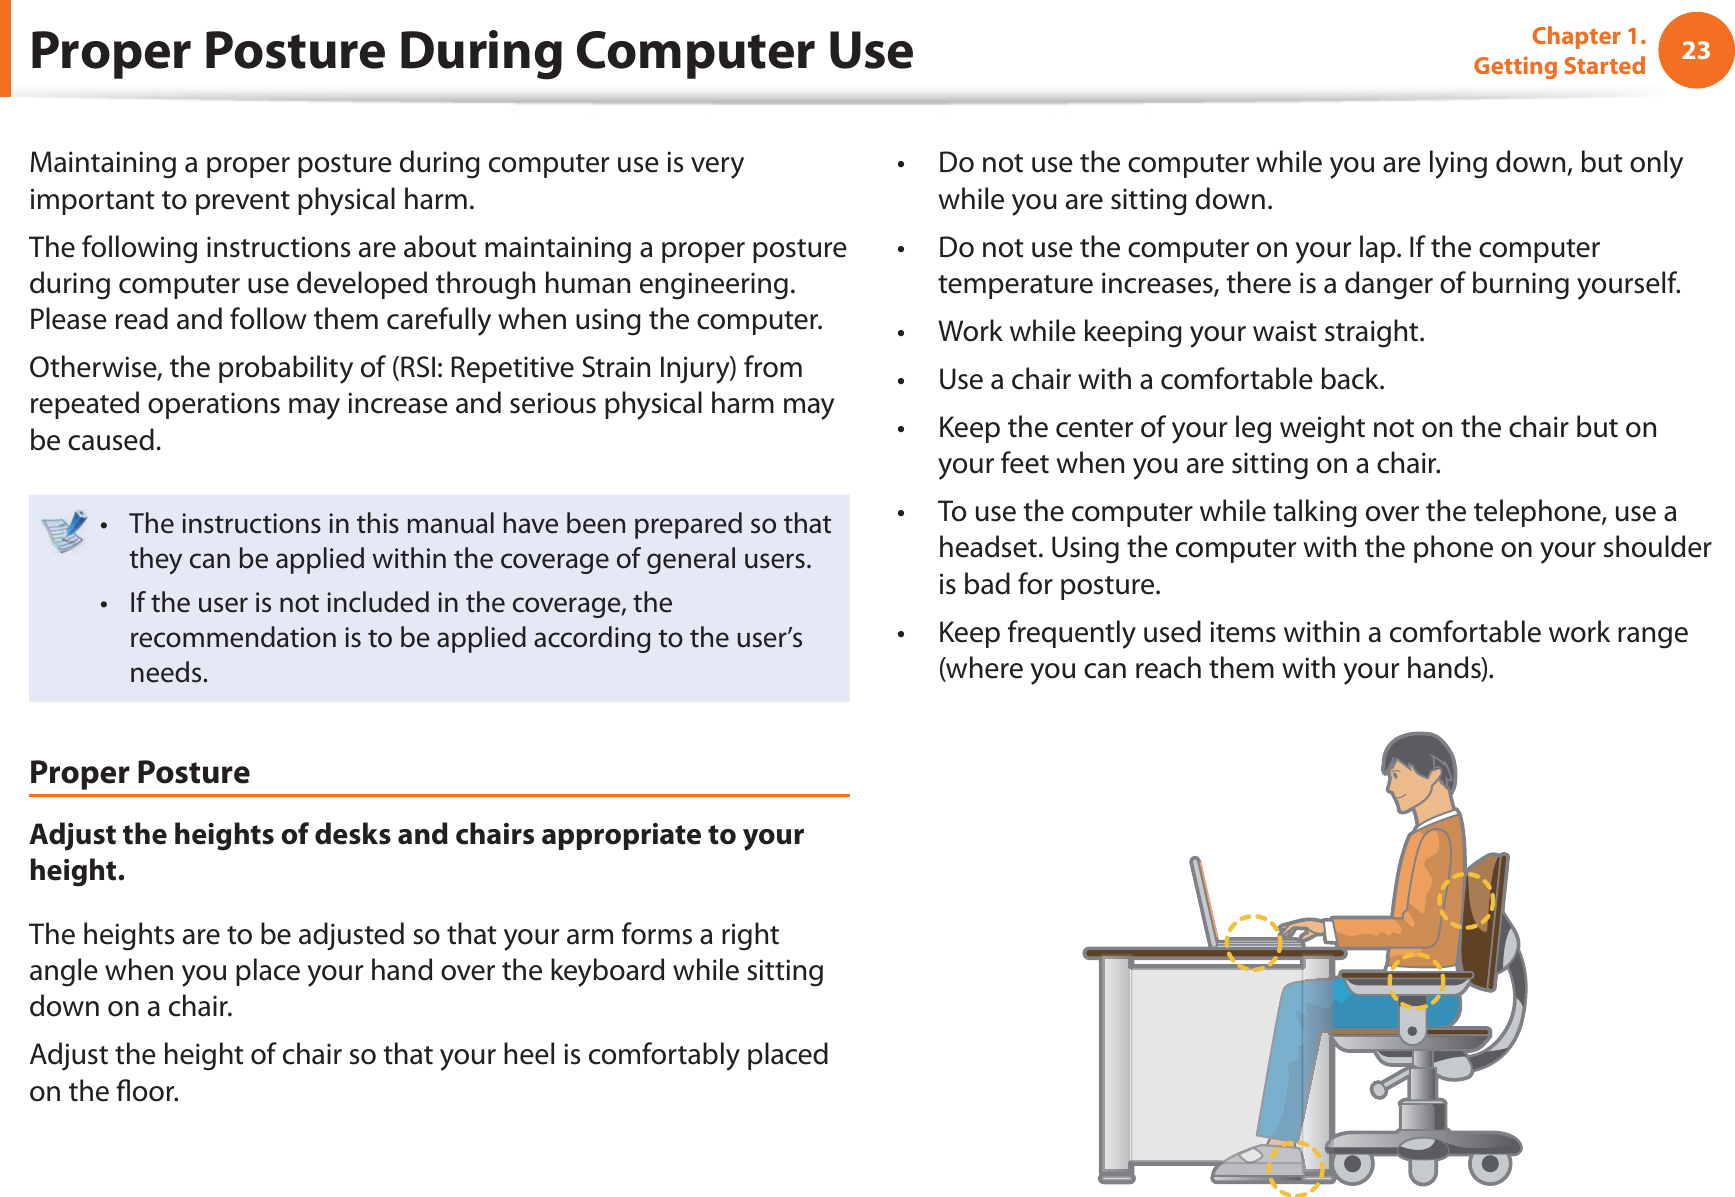 23Chapter 1. Getting StartedProper Posture During Computer UseMaintaining a proper posture during computer use is very important to prevent physical harm.The following instructions are about maintaining a proper posture during computer use developed through human engineering. Please read and follow them carefully when using the computer.Otherwise, the probability of (RSI: Repetitive Strain Injury) from repeated operations may increase and serious physical harm may be caused.The instructions in this manual have been prepared so that t they can be applied within the coverage of general users. If the user is not included in the coverage, the t recommendation is to be applied according to the user’s needs.Proper PostureAdjust the heights of desks and chairs appropriate to your height.The heights are to be adjusted so that your arm forms a right angle when you place your hand over the keyboard while sitting down on a chair.Adjust the height of chair so that your heel is comfortably placed on the  oor.Do not use the computer while you are lying down, but only t while you are sitting down.Do not use the computer on your lap. If the computer t temperature increases, there is a danger of burning yourself.Work while keeping your waist straight.t Use a chair with a comfortable back.t Keep the center of your leg weight not on the chair but on t your feet when you are sitting on a chair.To use the computer while talking over the telephone, use a t headset. Using the computer with the phone on your shoulder is bad for posture.Keep frequently used items within a comfortable work range t (where you can reach them with your hands).